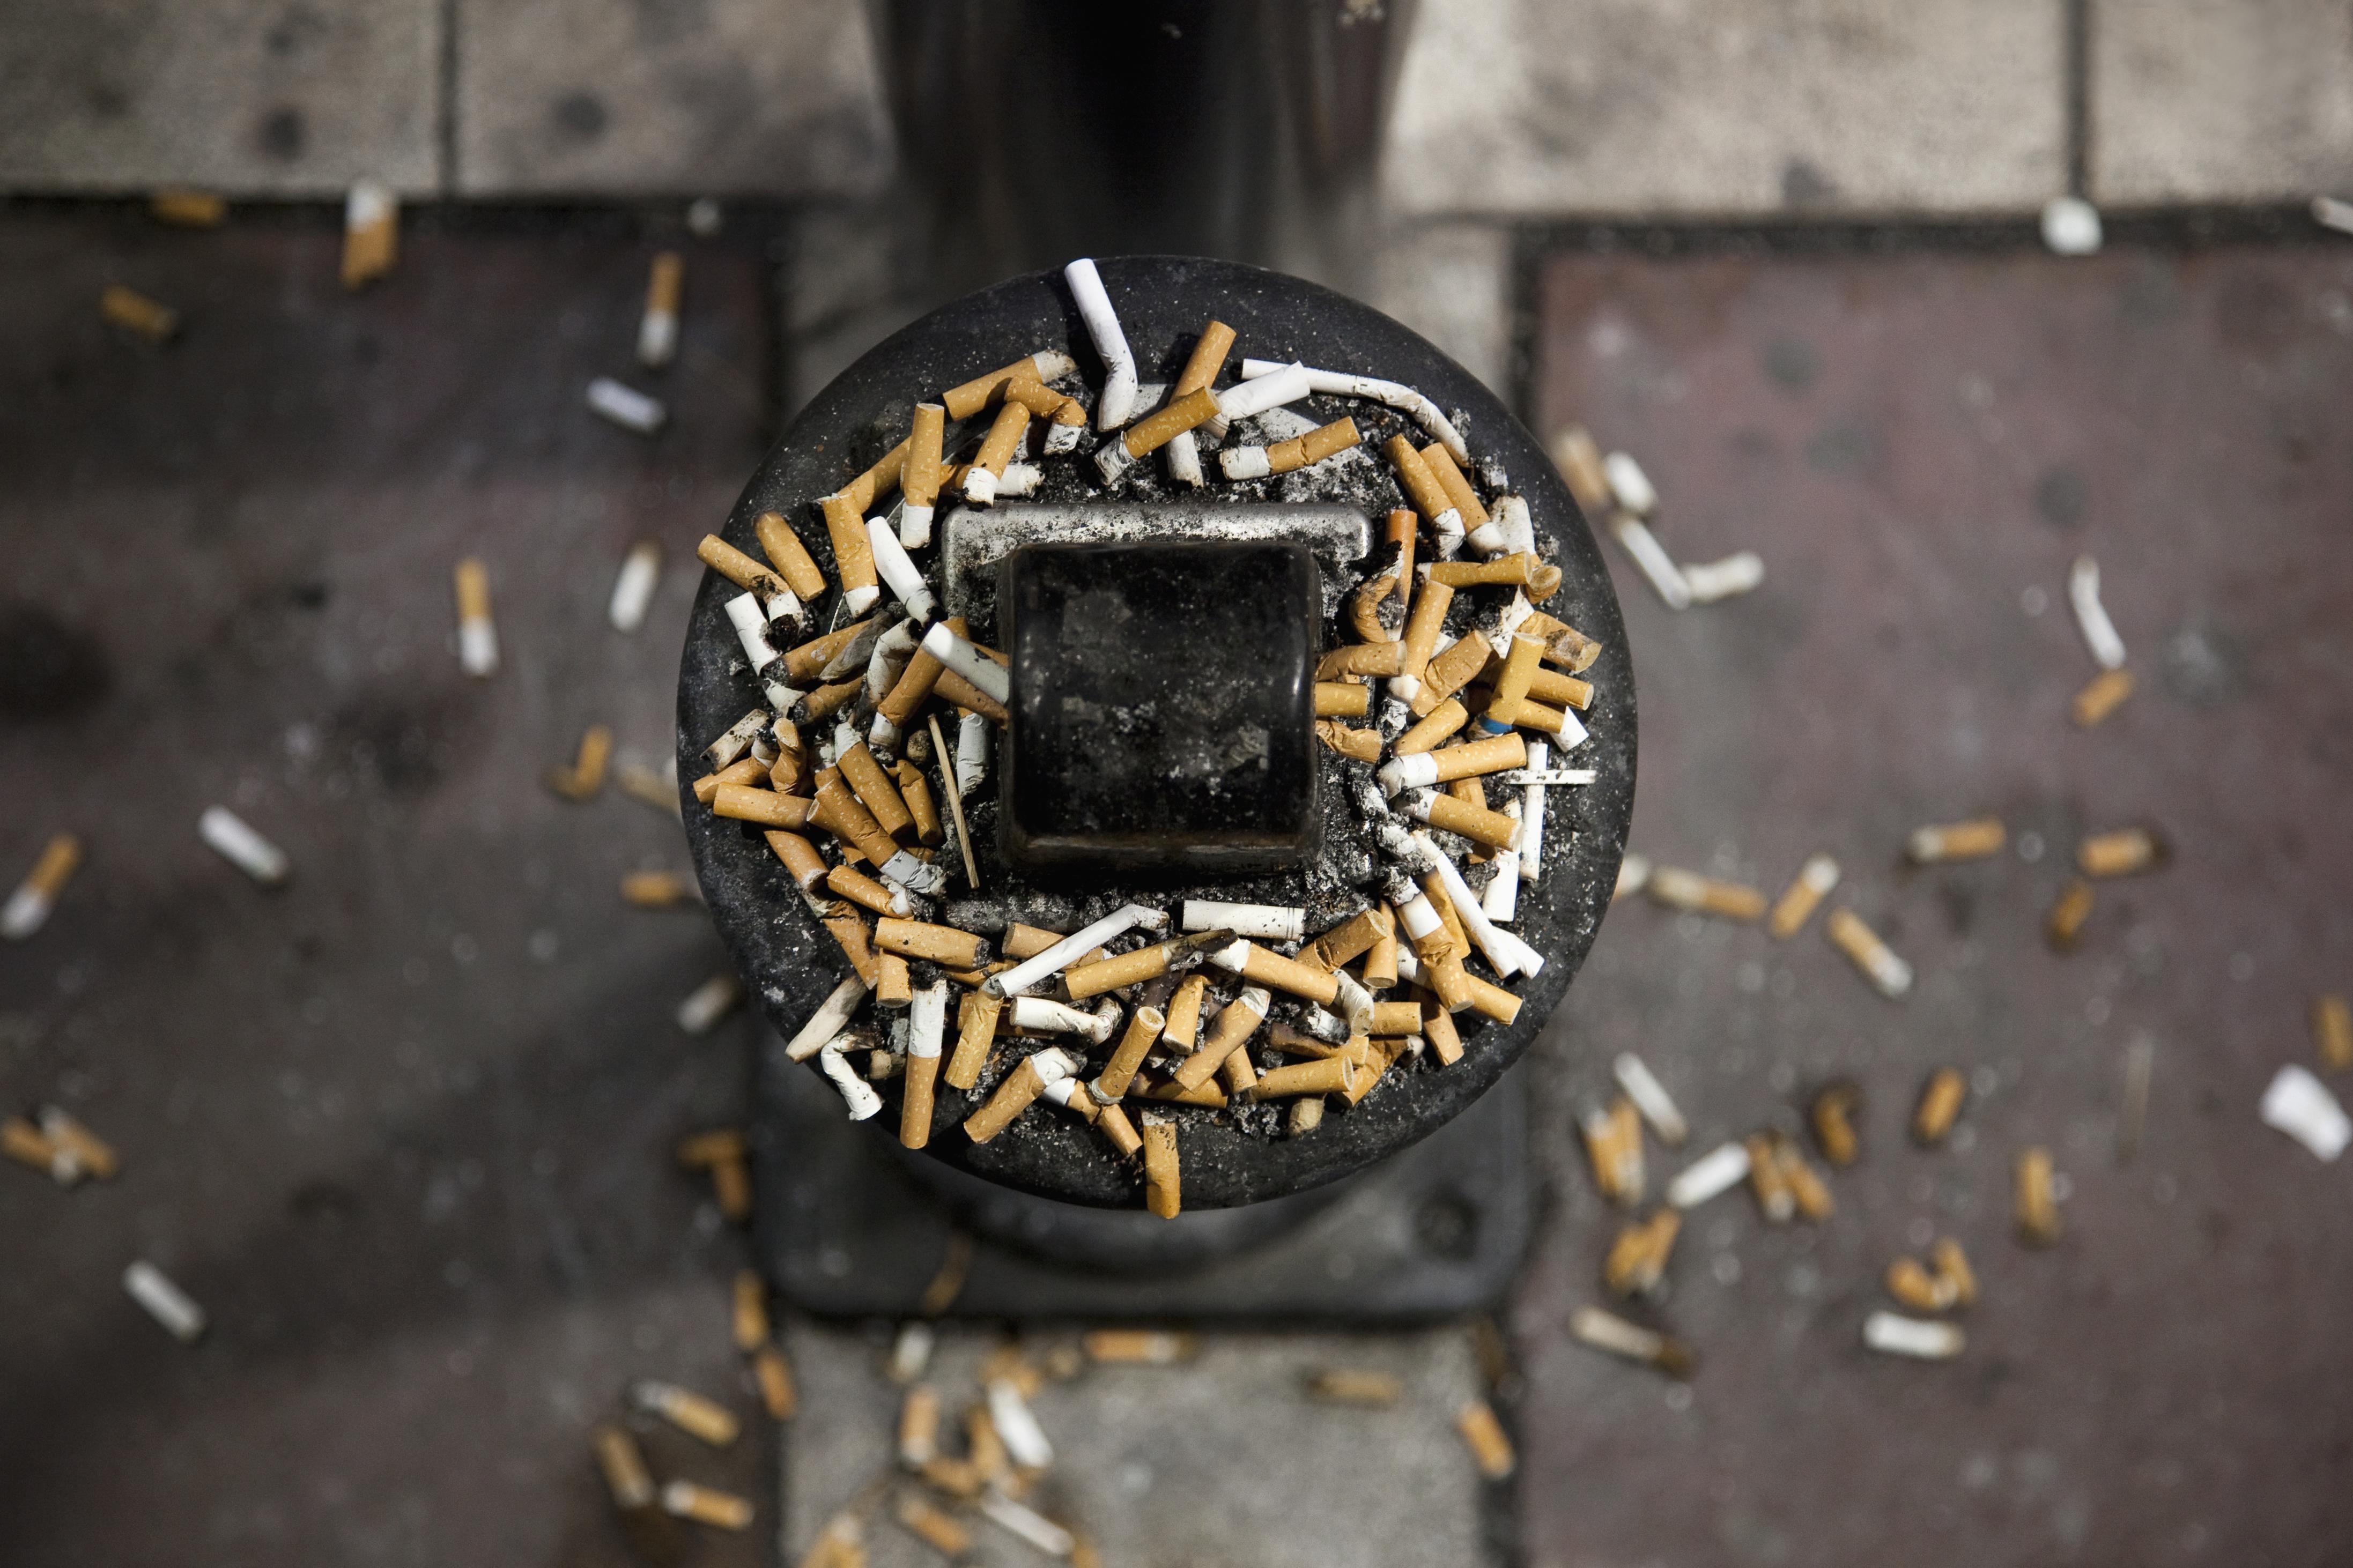 Cigarette butts spilling out of an outdoor ashtray and o<em></em>nto the ground around it.